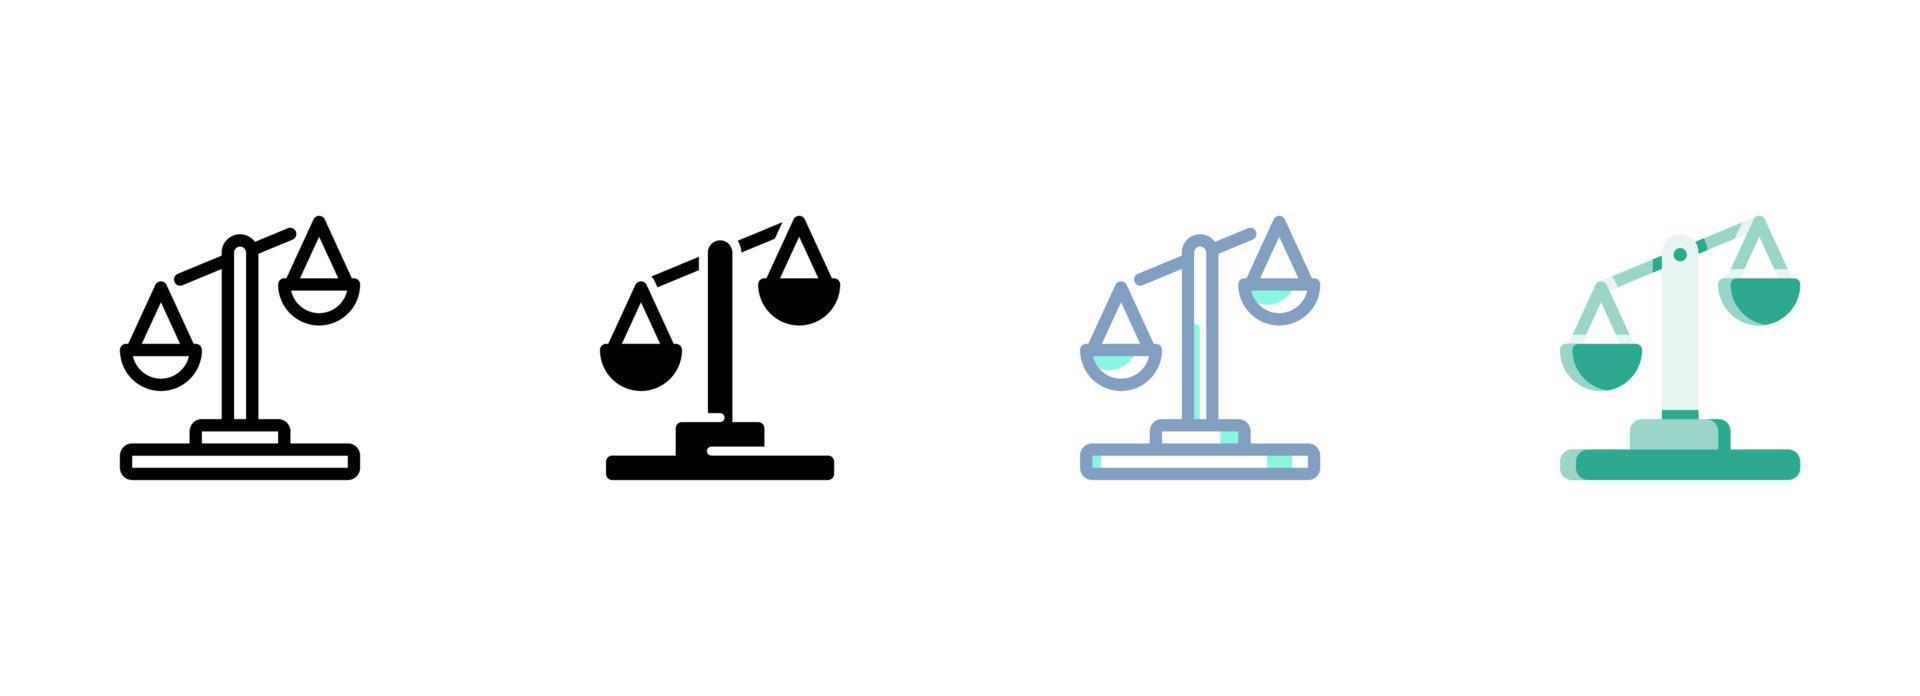 Simple vector icon on a theme scales of justice